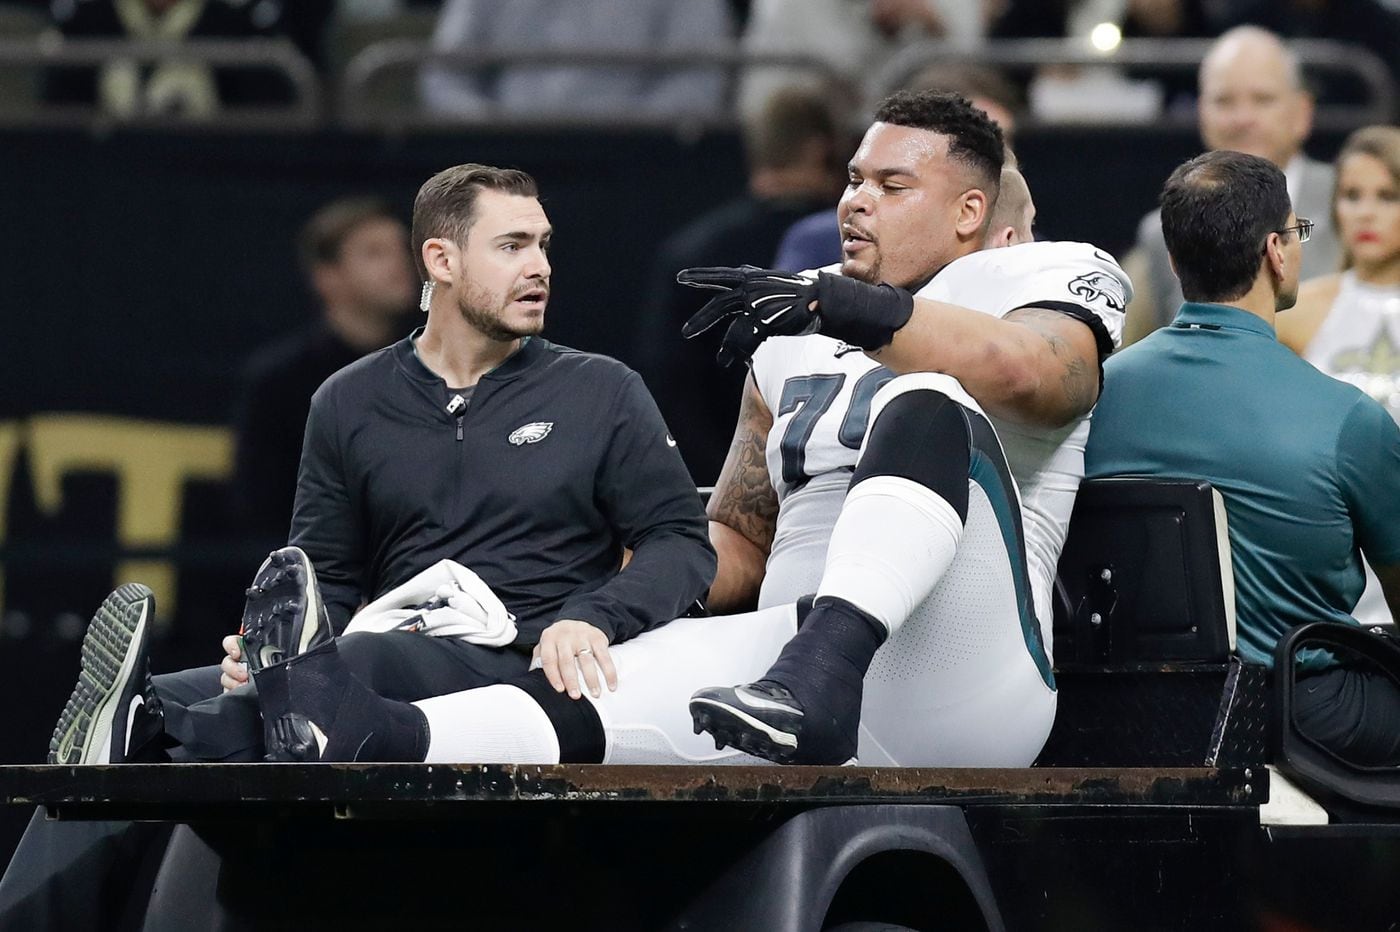 A Podiatrist Is Trying To Convince Eagles Nfl That Injury